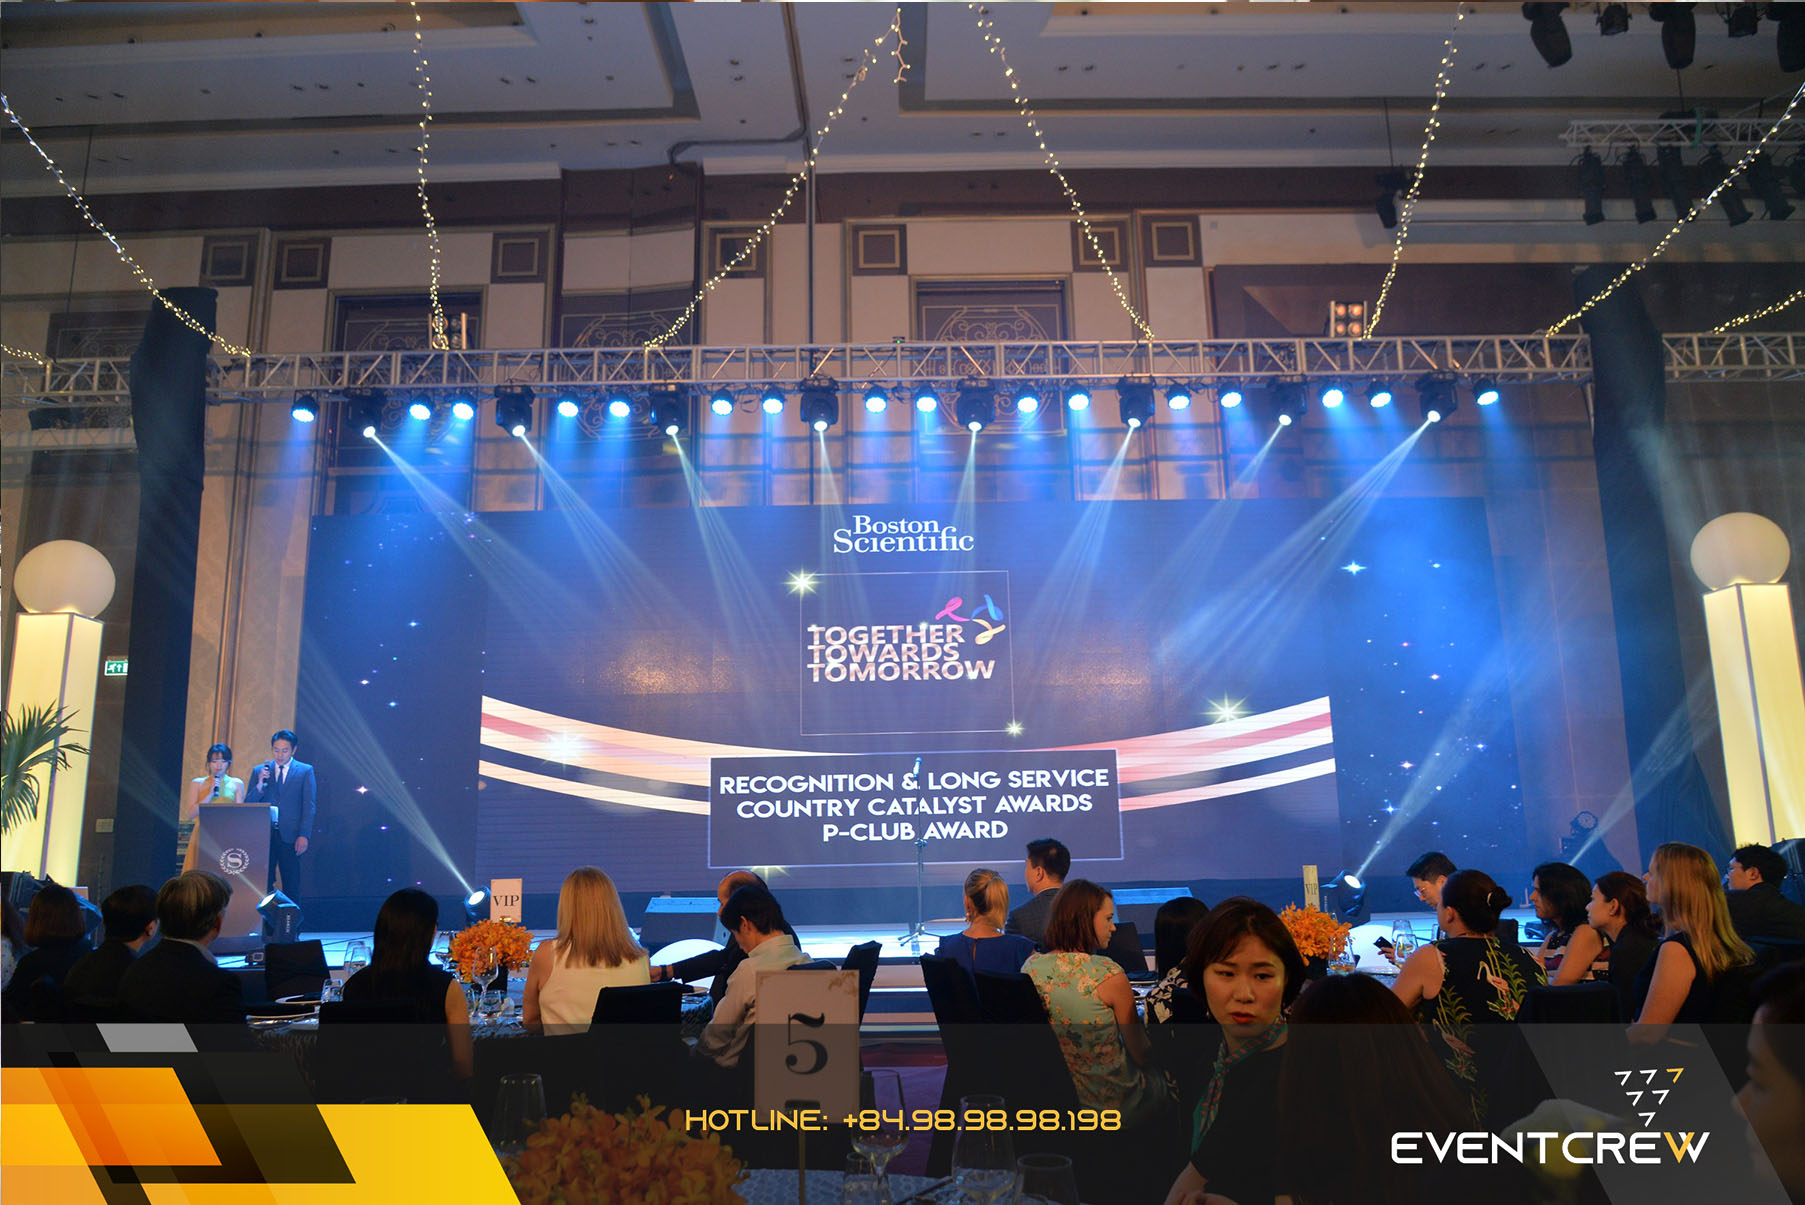 OUR EVENT SERVICES